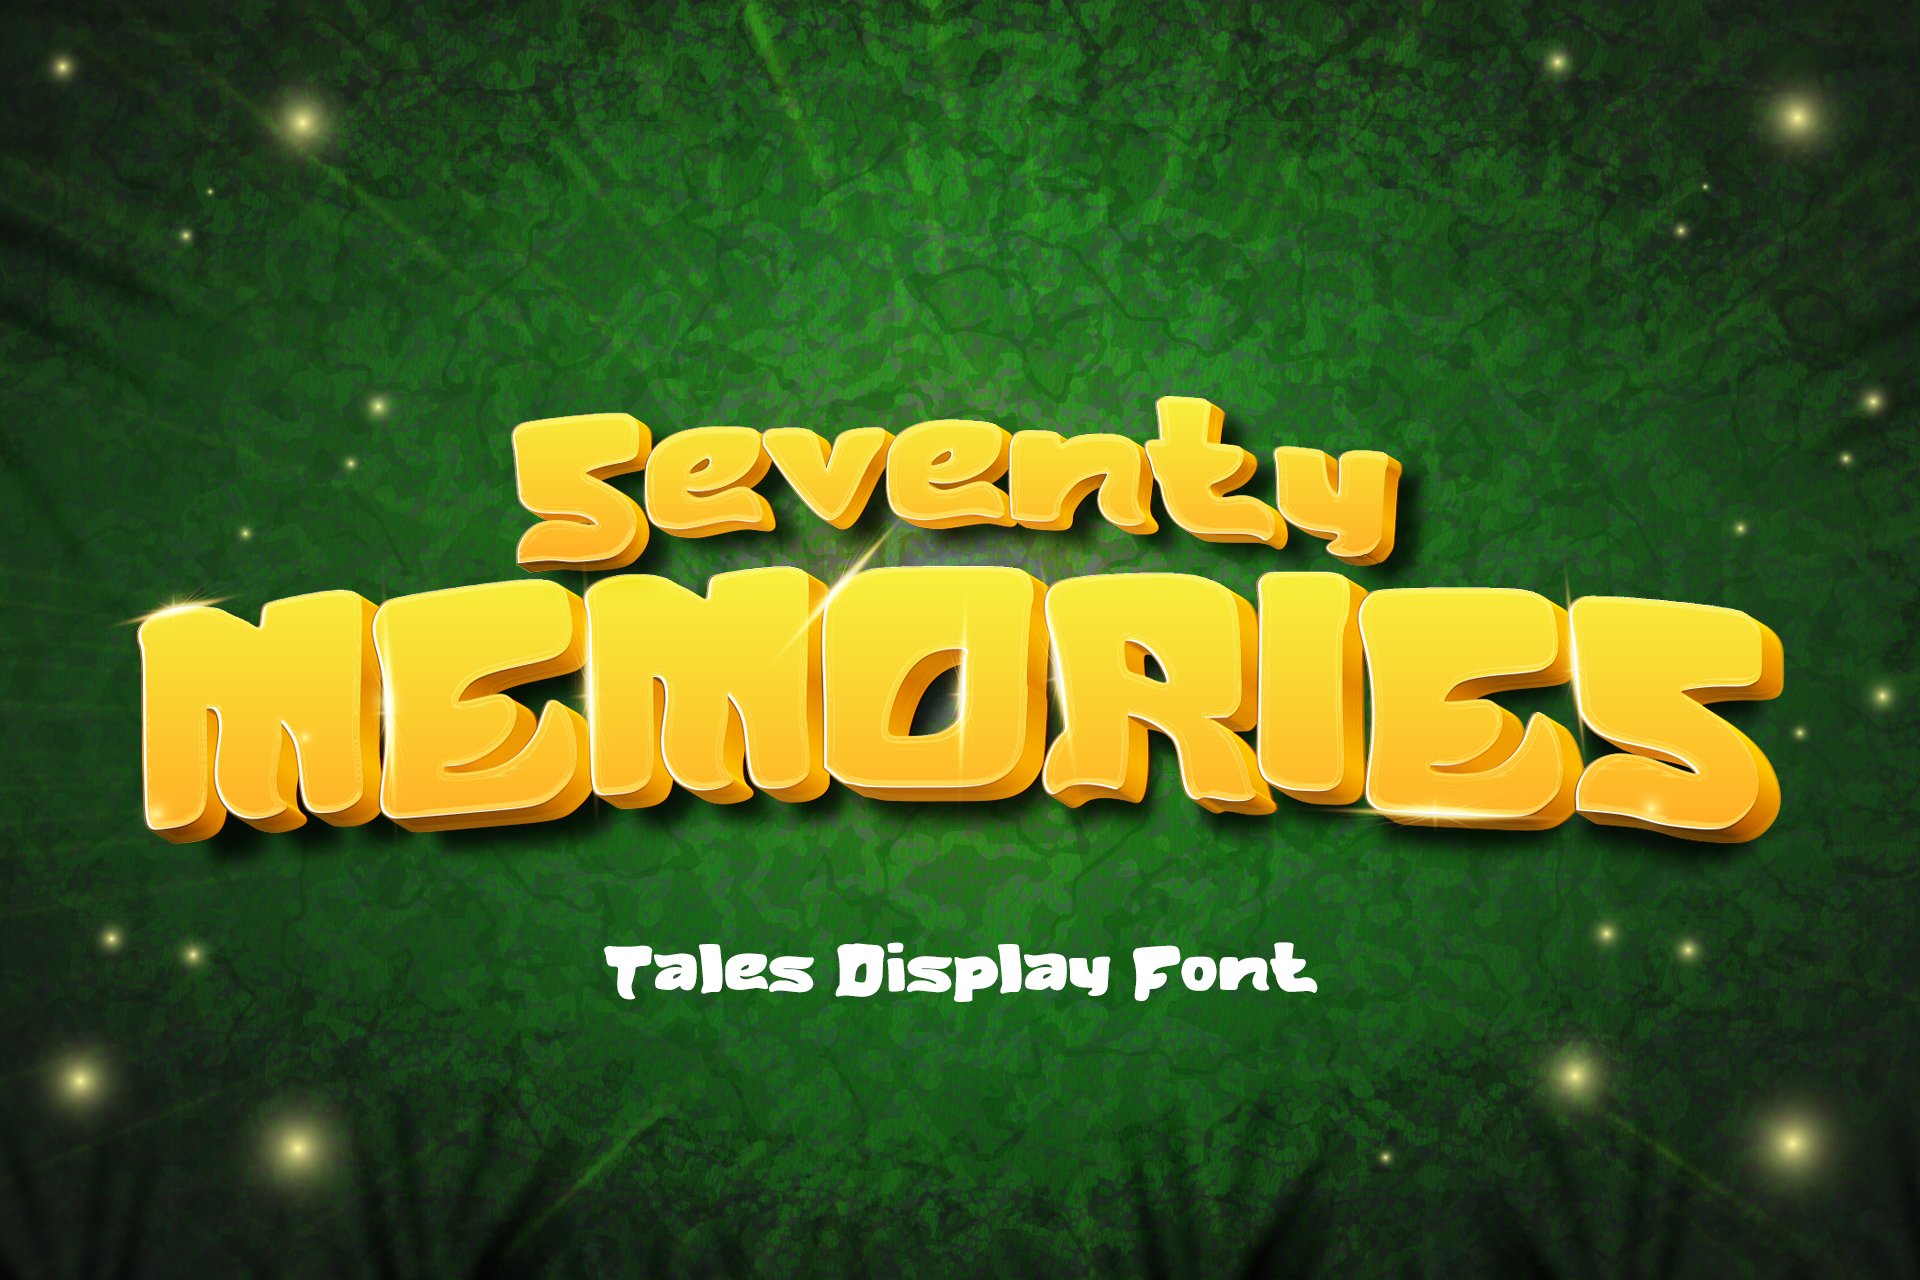 Seventy Memories Tale Display Font cover image.